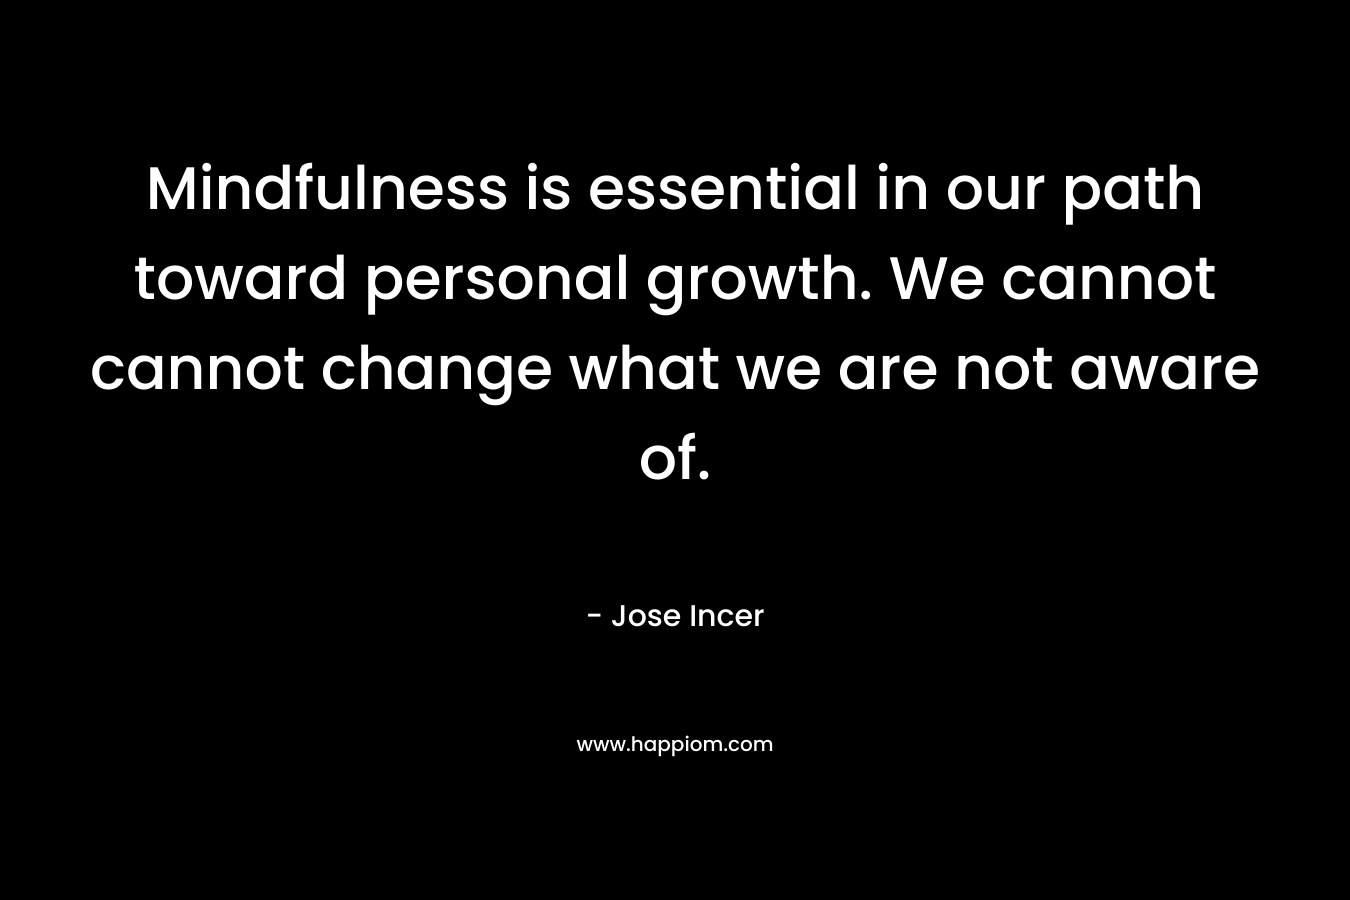 Mindfulness is essential in our path toward personal growth. We cannot cannot change what we are not aware of. – Jose Incer